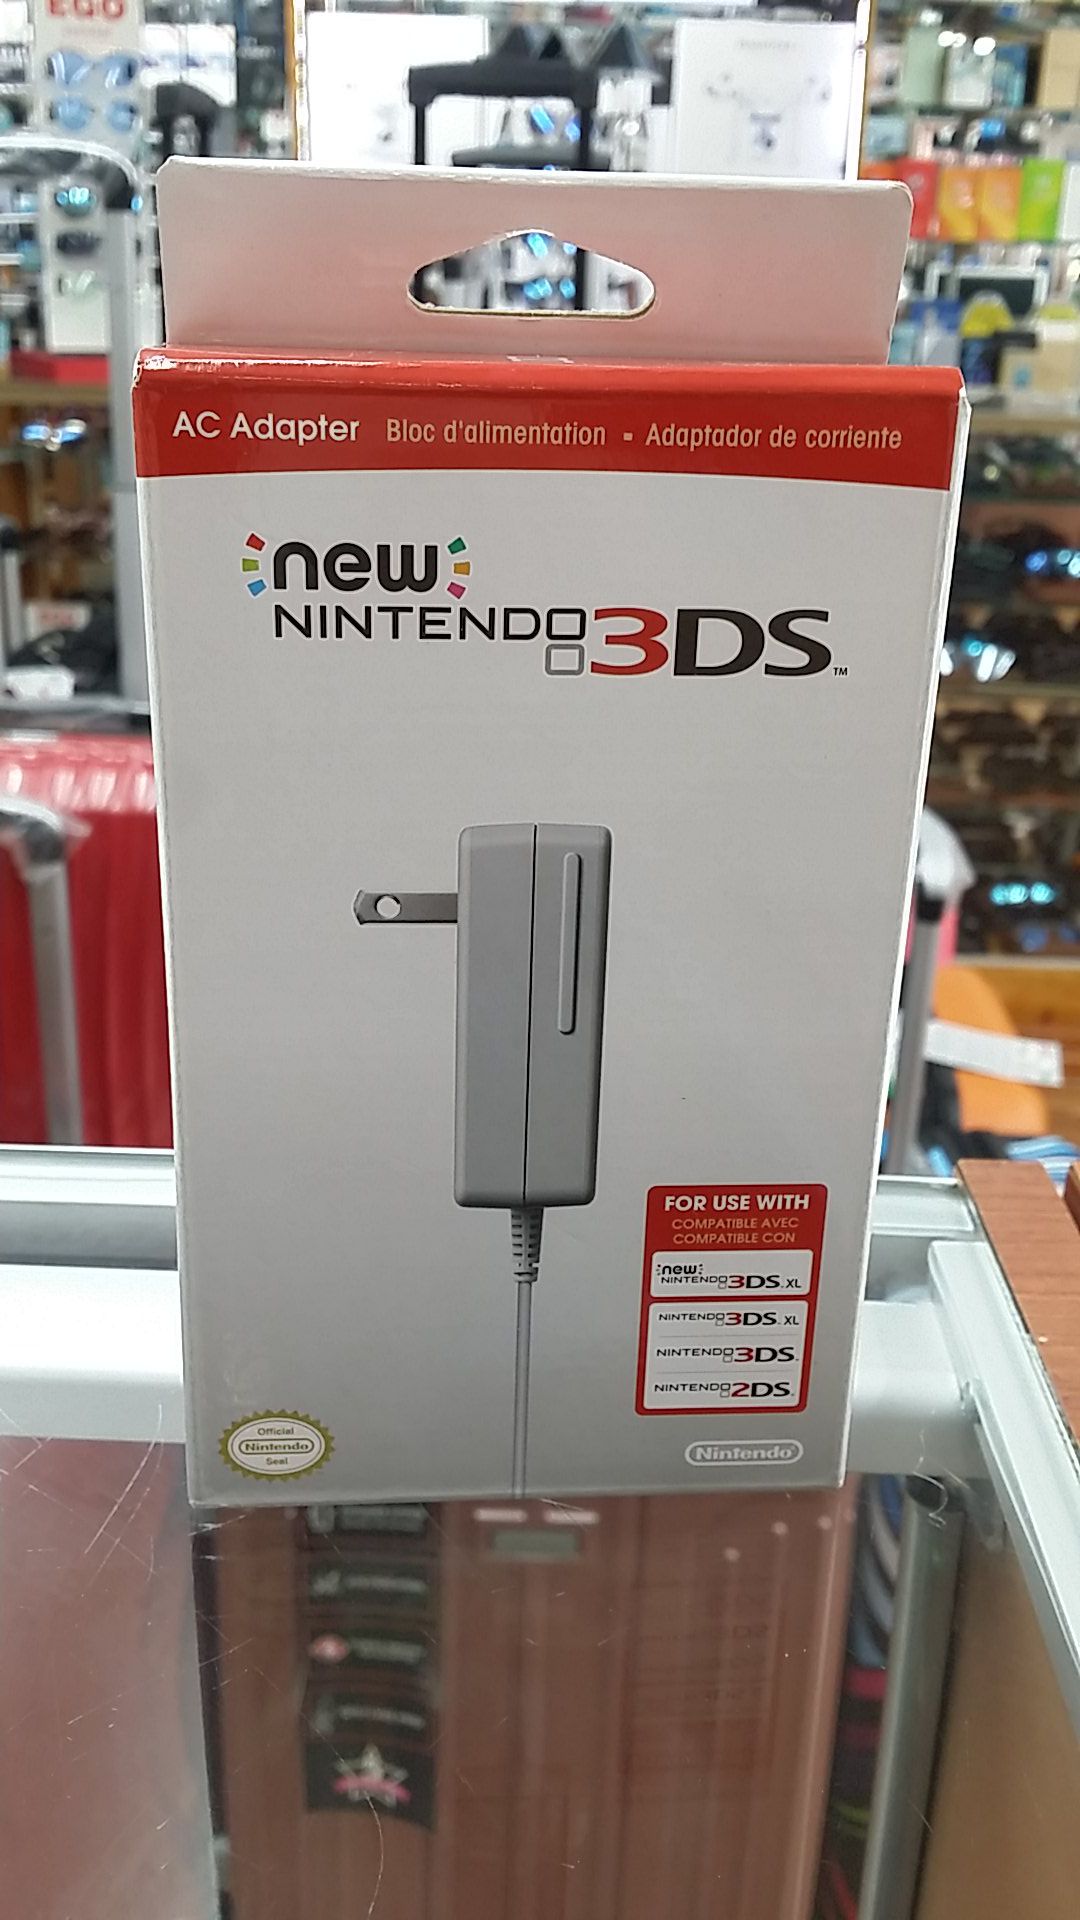 AC ADAPTER NEW NINTENDO 3DS ANY MODEL FOR SALE TODAY!!!